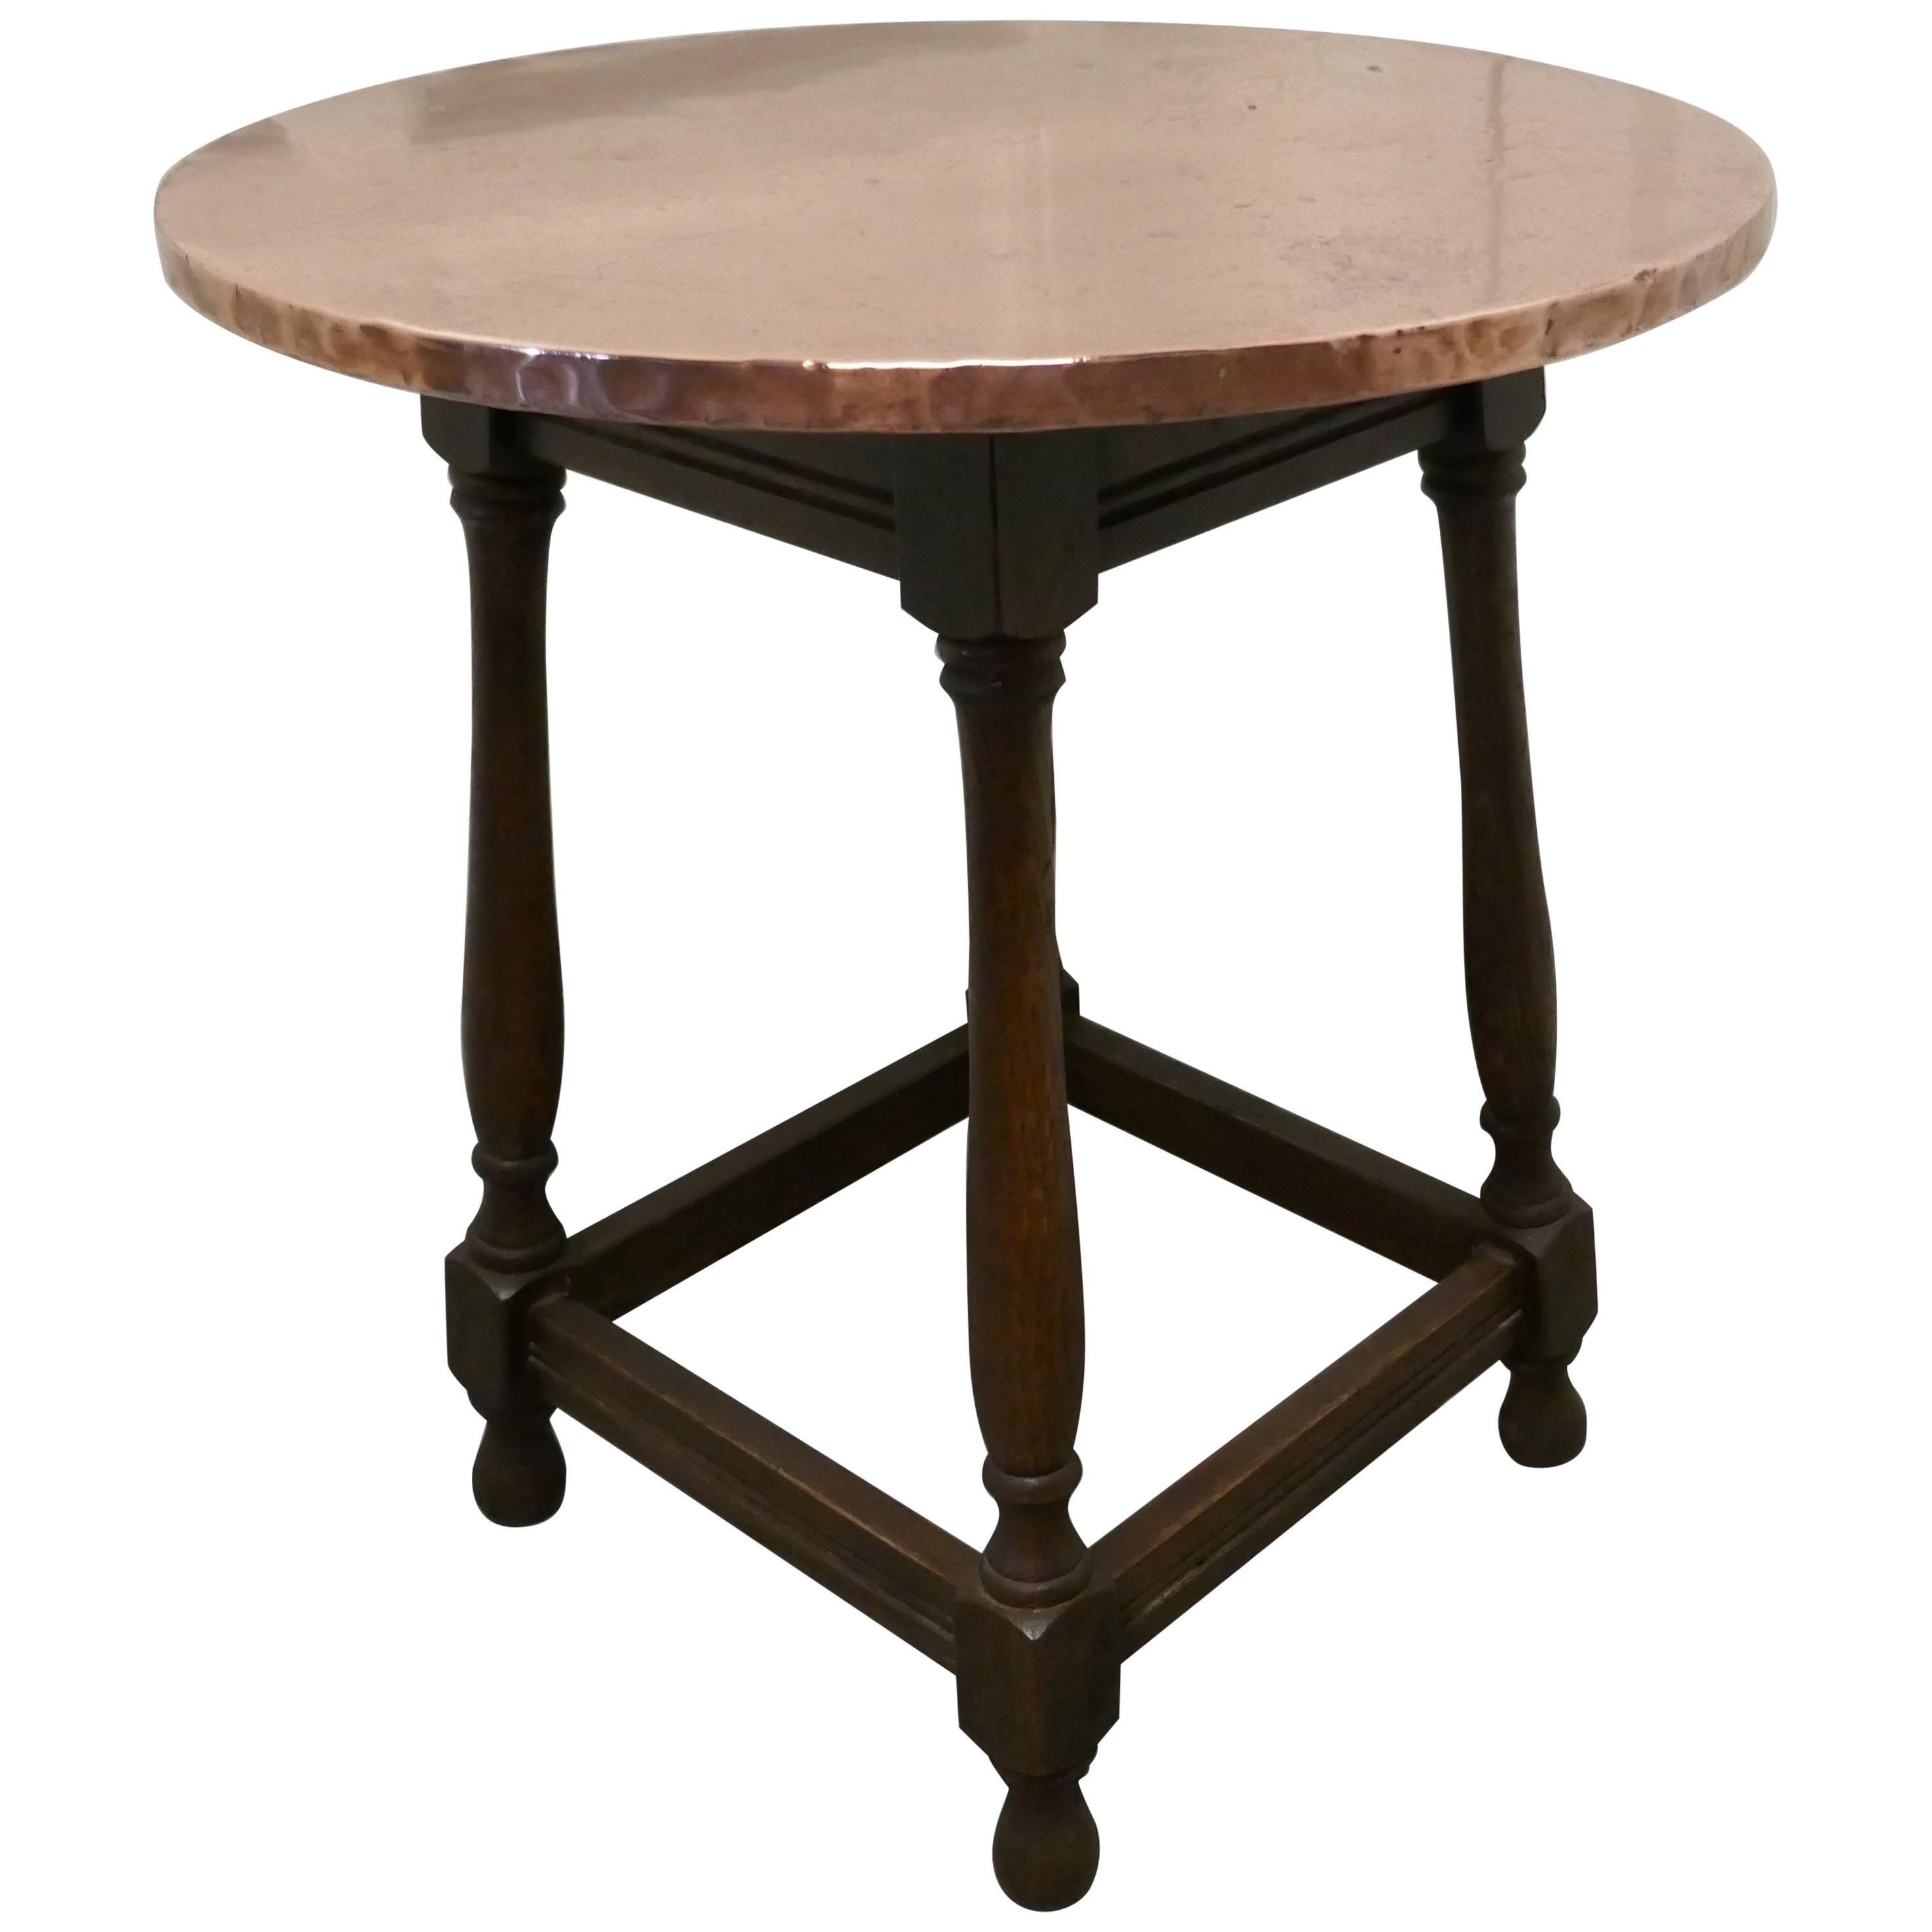 Copper Topped Tavern Table or Occasional Table